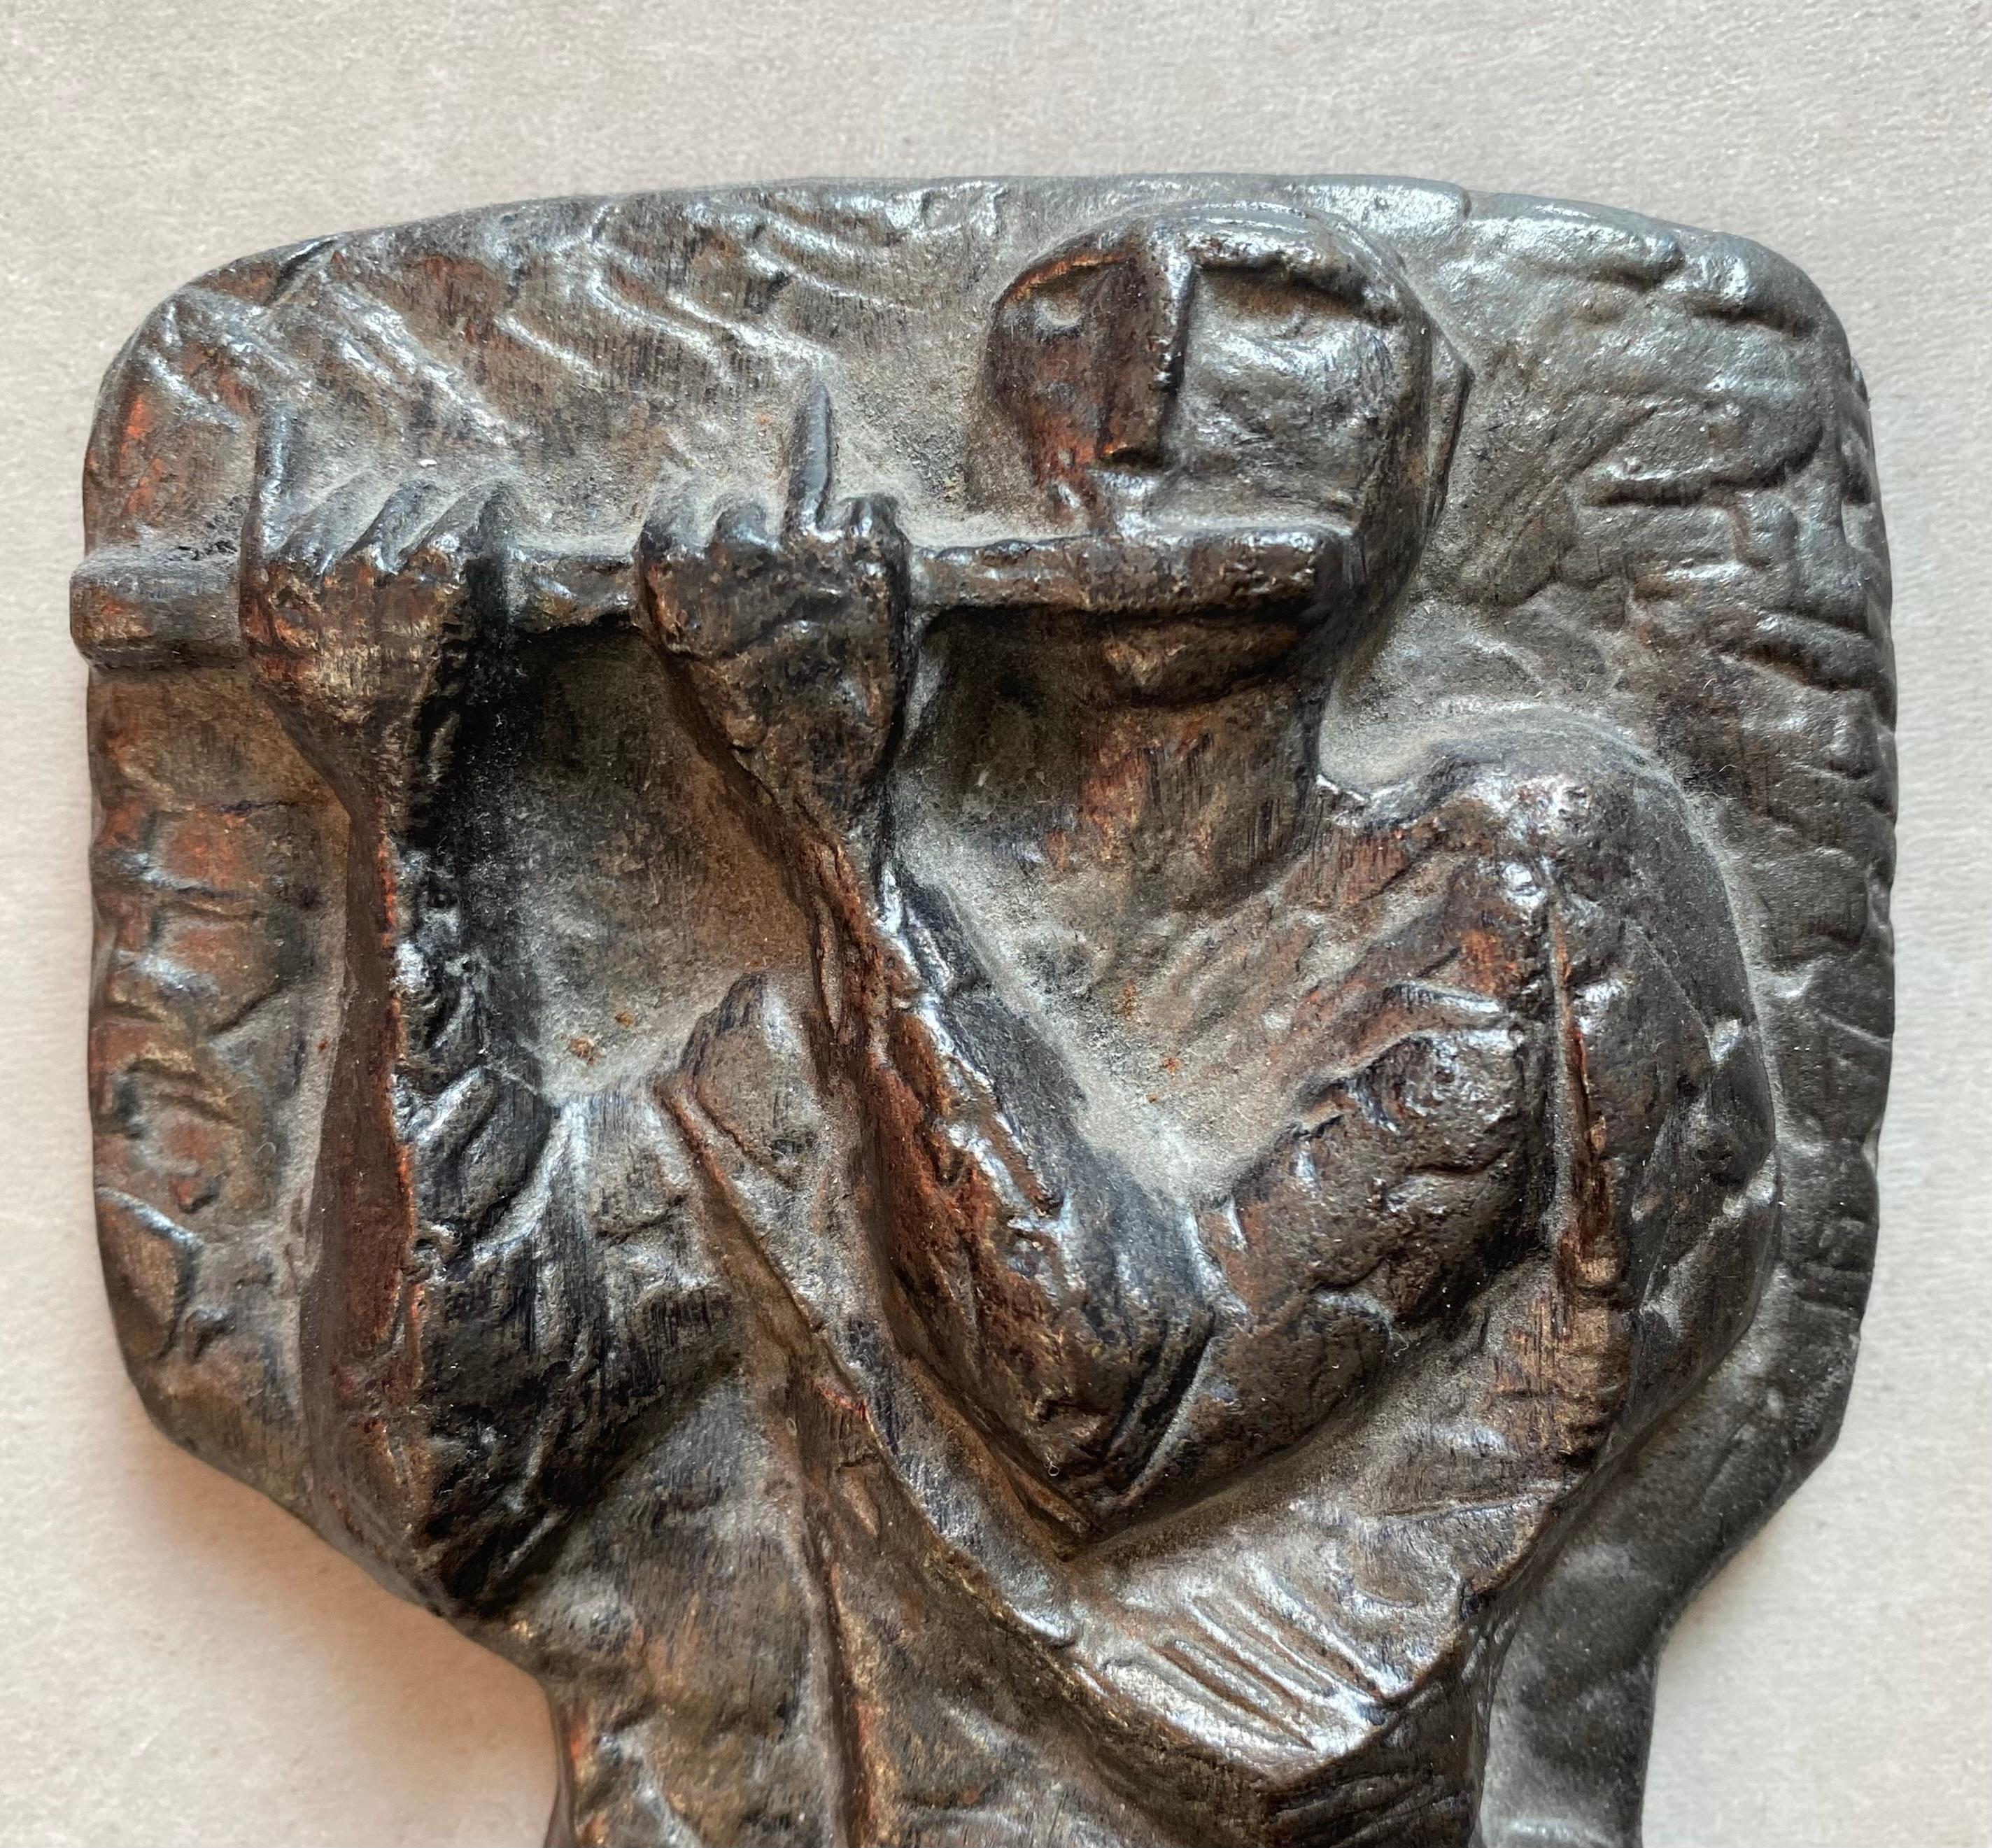 Abstract, Brutalist, Cast Iron Wall Art , Male Figure with Flute by Cor Dam, The Netherlands, Delft, 1965. Stunning piece which is signed and dated.
 
About: Cor Dam (Delft, 1935 –  2019).
Cor Dam trained at the Royal Academy of Art in The Hague and